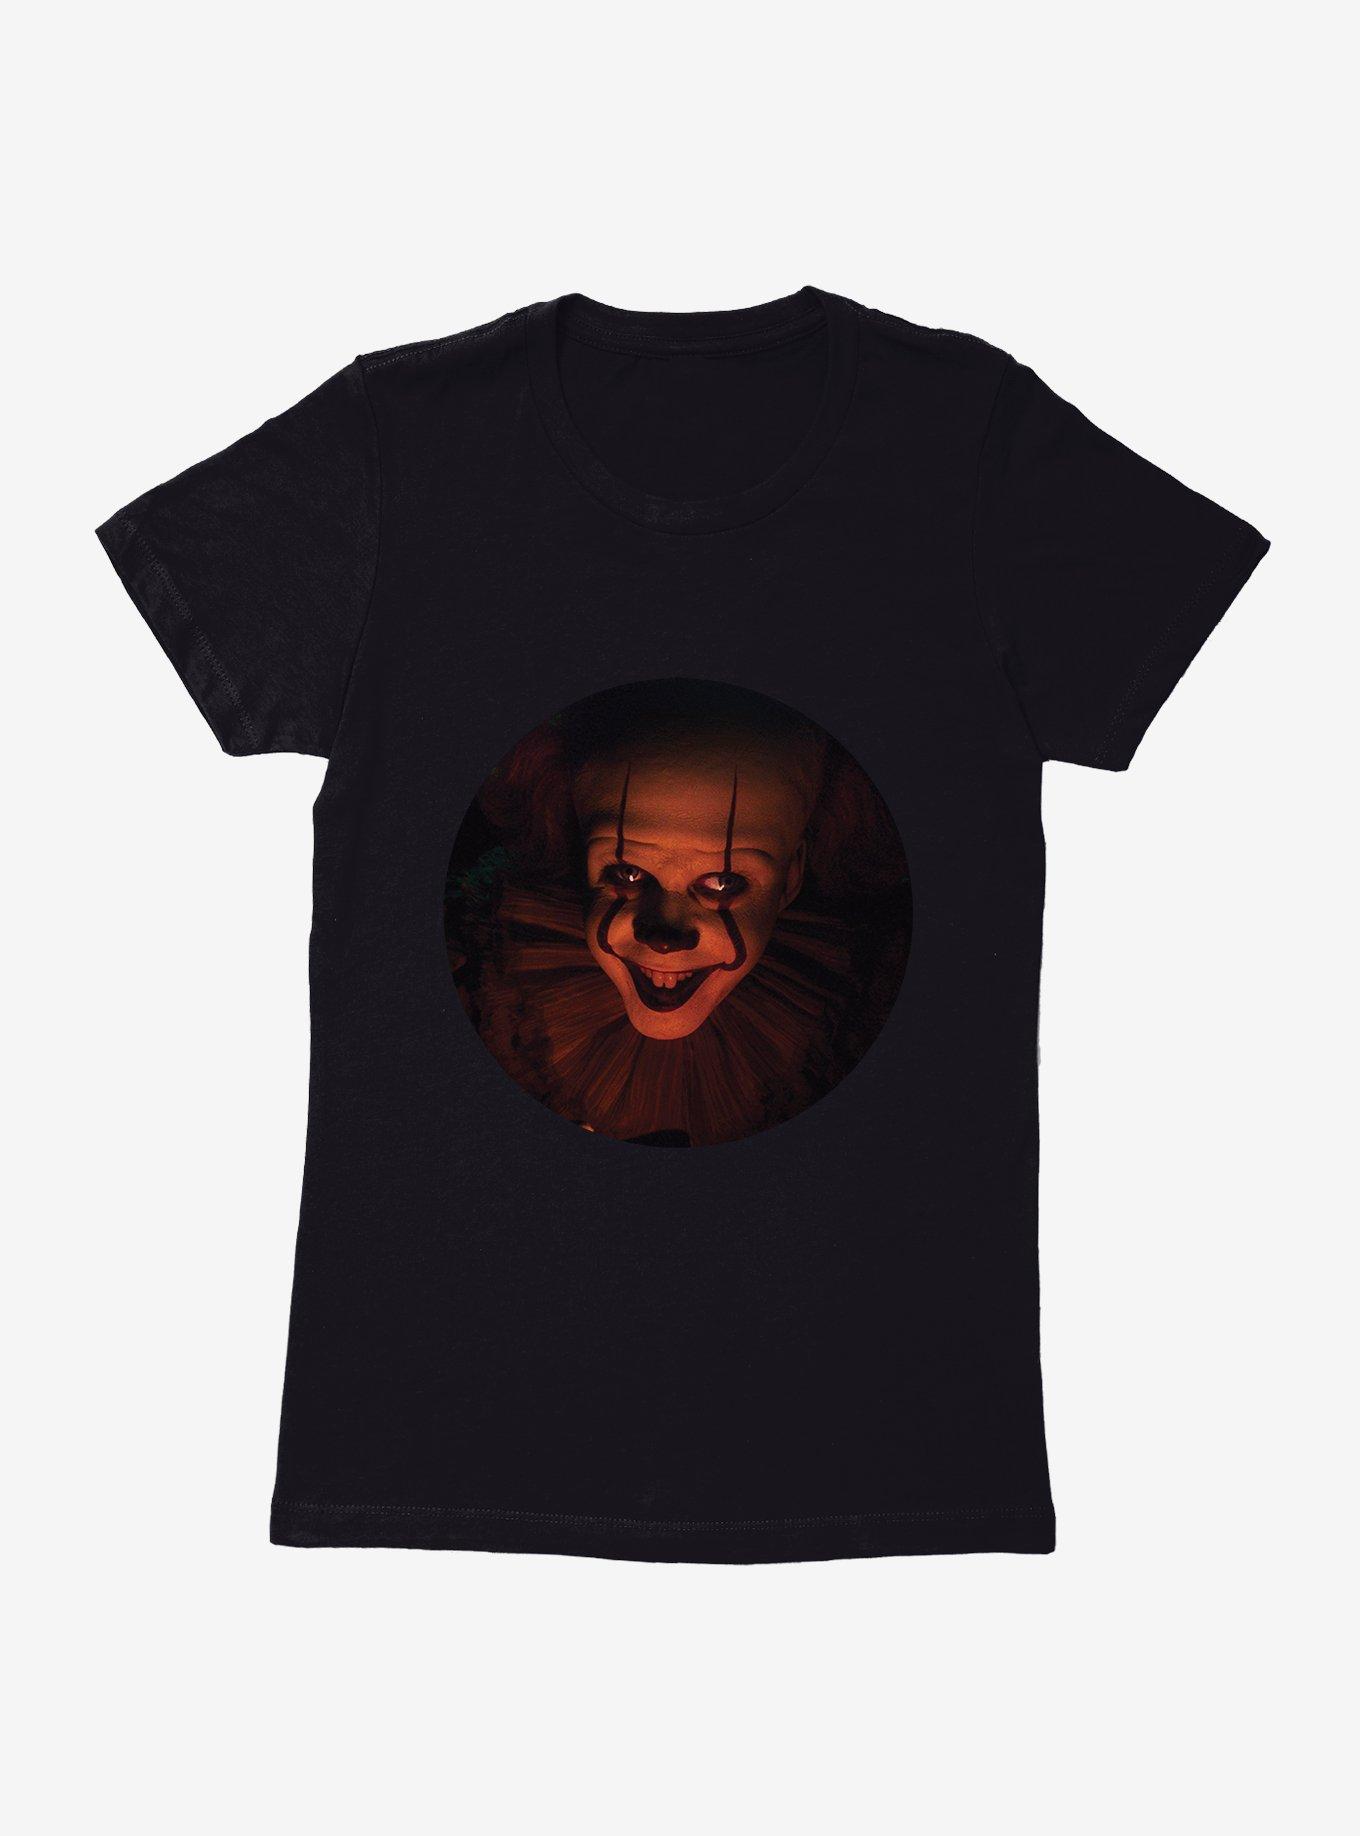 IT Chapter Two Pennywise Grin Circle Womens T-Shirt, BLACK, hi-res